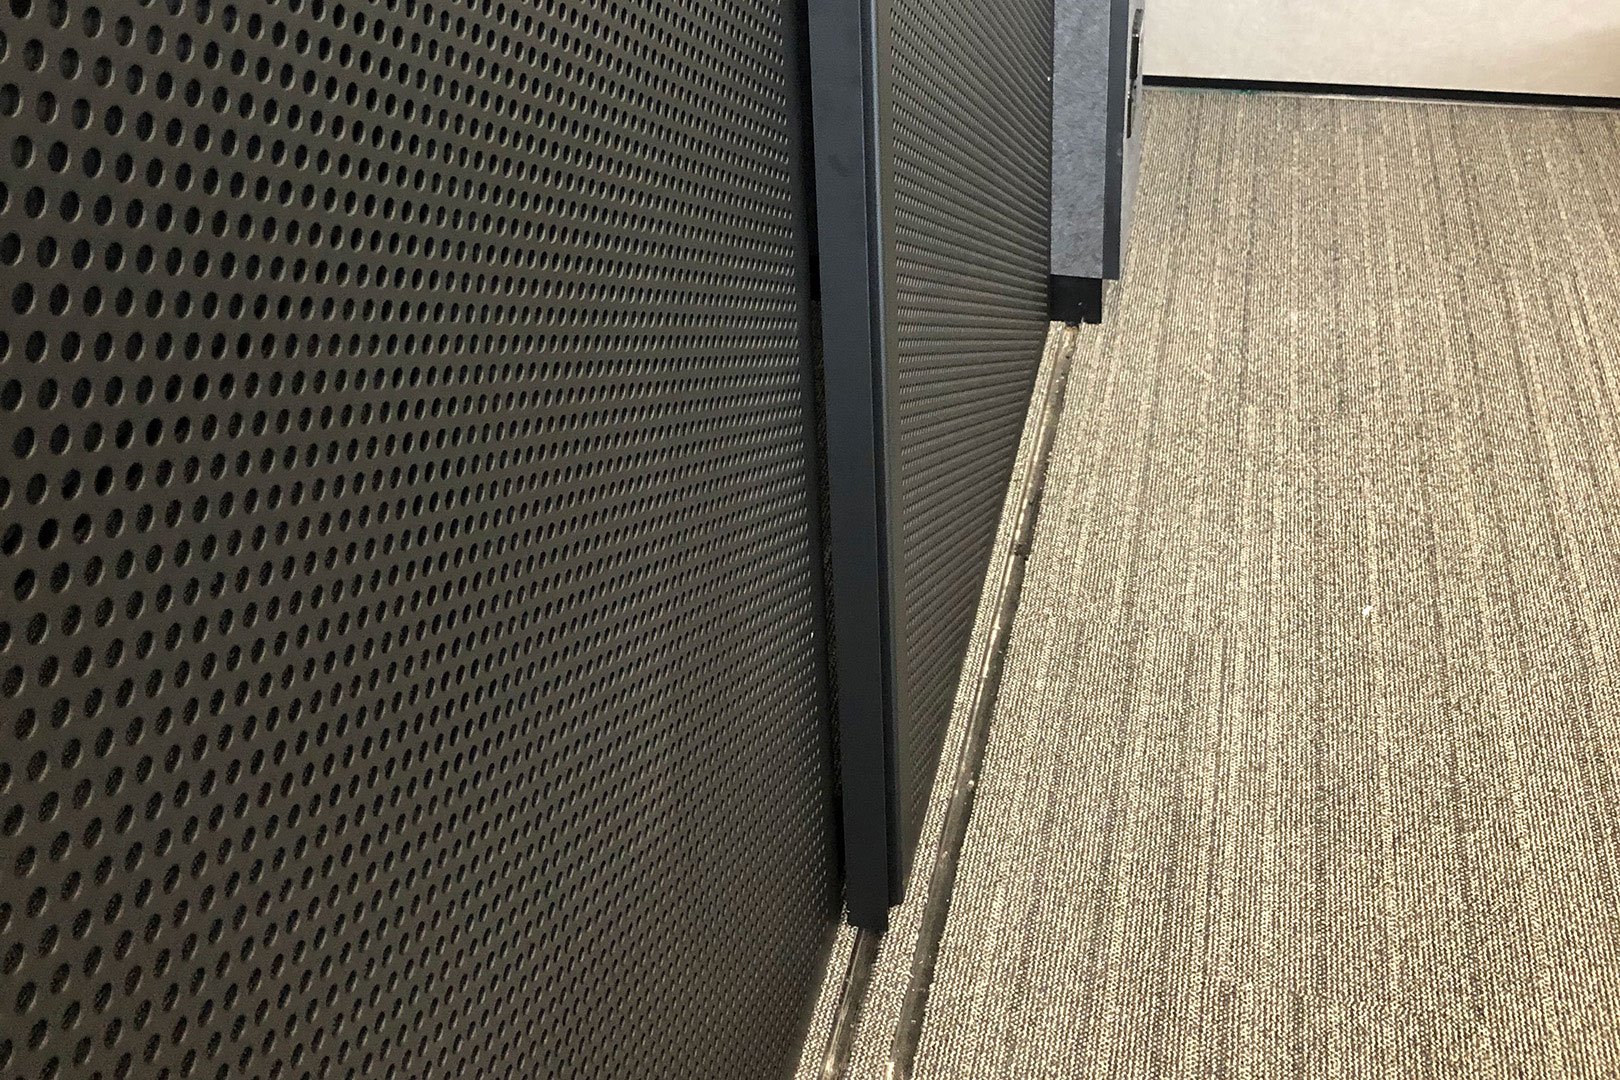 image of a track system of architectural privacy sliding screens at a school